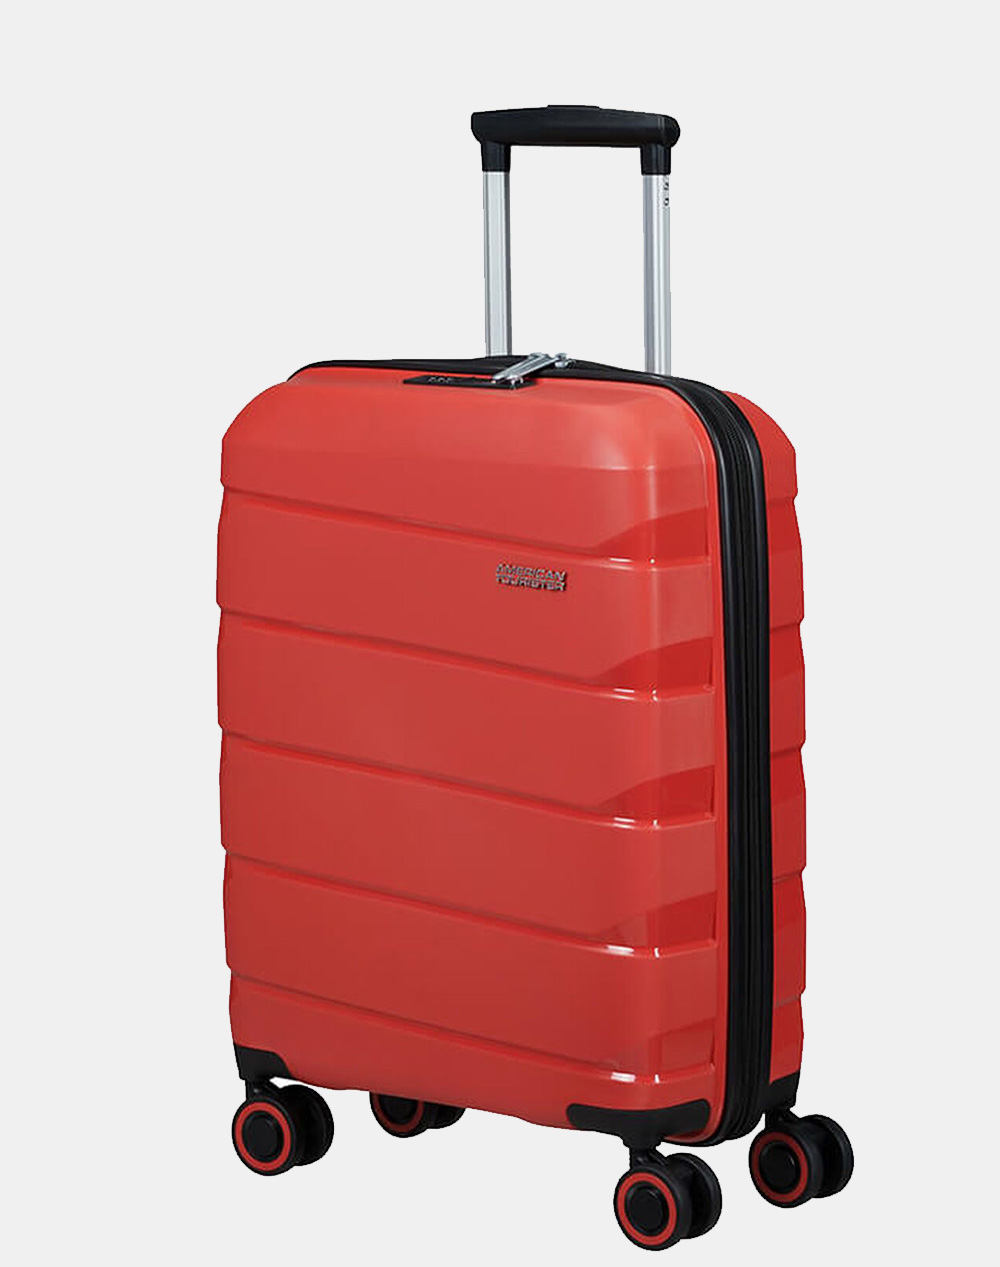 AMERICAN TOURISTER SUITCASE AIR MOVE-SPINNER Dimensions: 55 X 40 X 20 ...